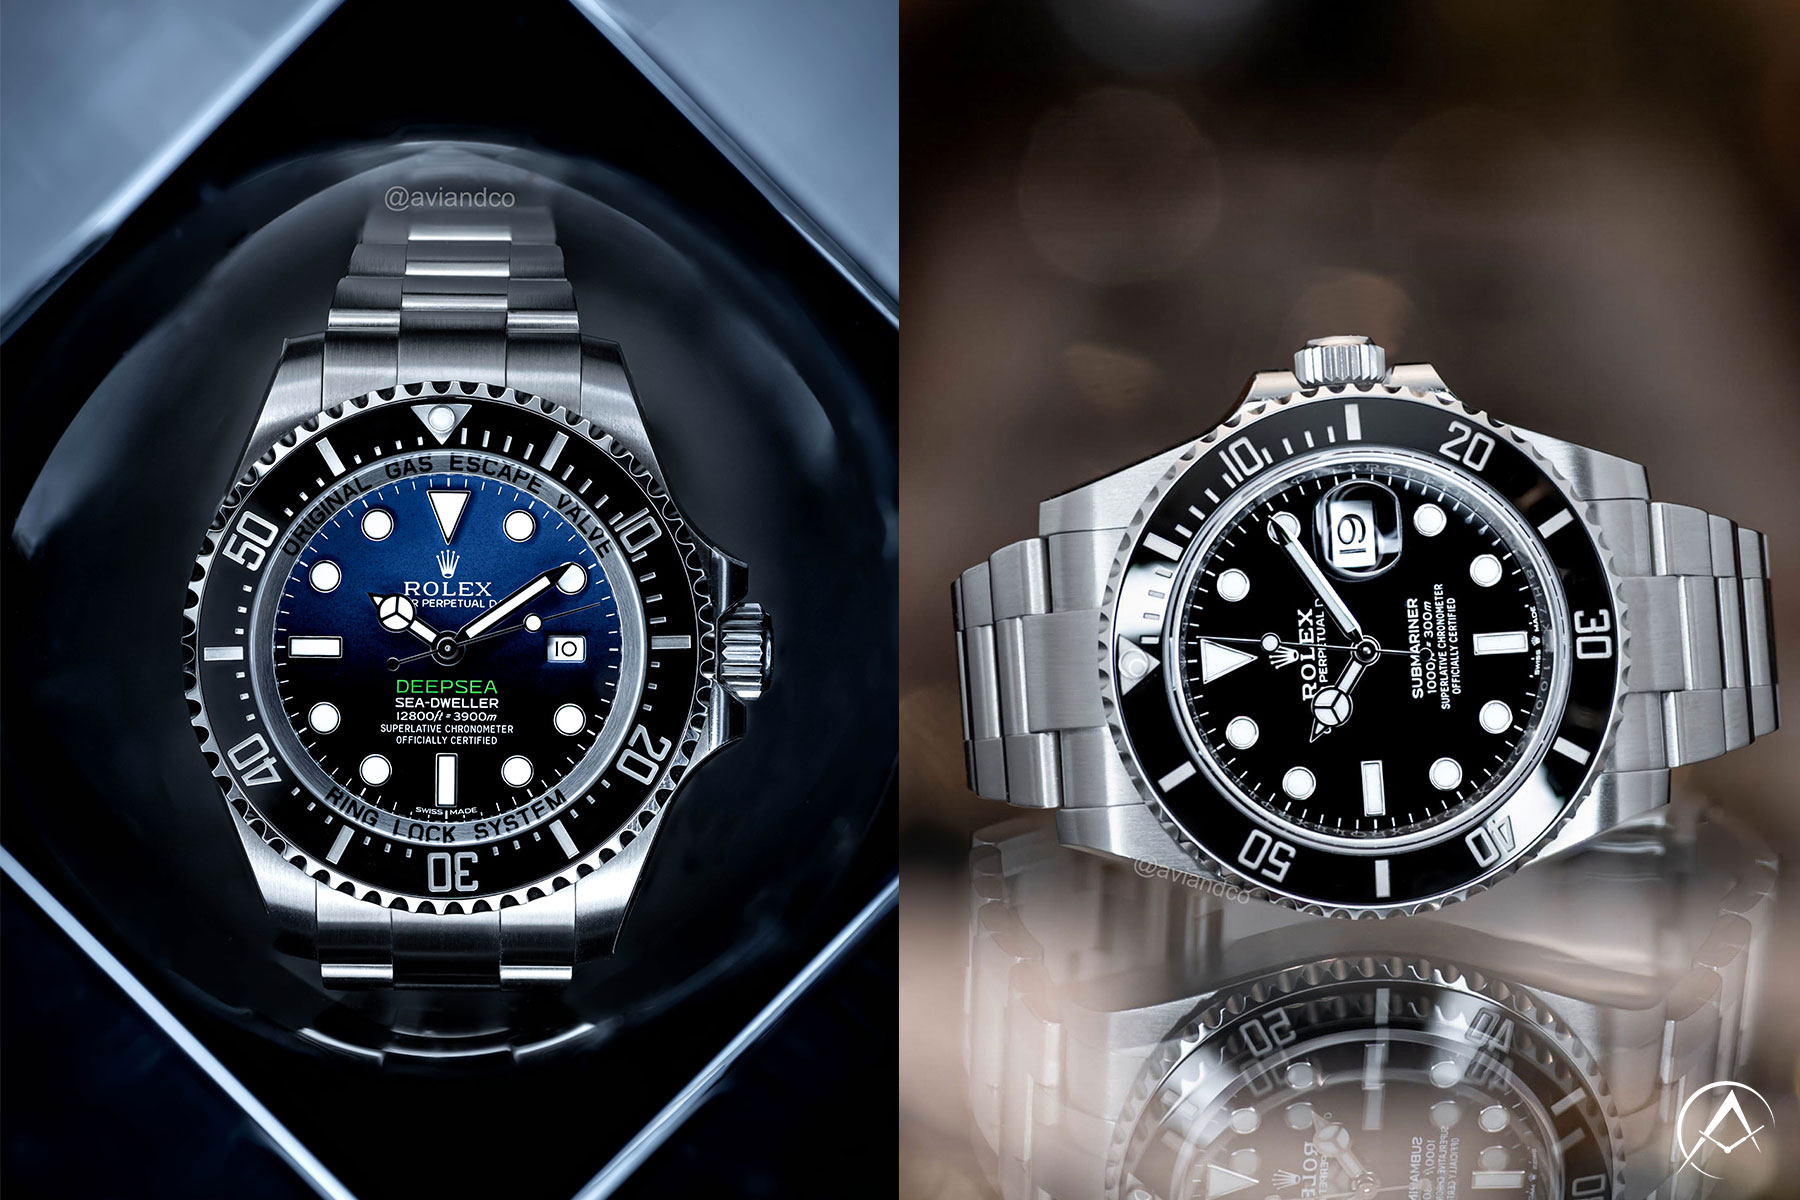 On Left: Rolex Sea-Dweller Deepsea Timepiece. Stainless Steel 44 mm with Unidirectional Ceramic Bezel, Blue Gradient Dial, and Black Bezel. On Right: Stainless Steel Rolex Submariner Timepiece with Unidirectional Ceramic Black Bezel, and Black Dial.